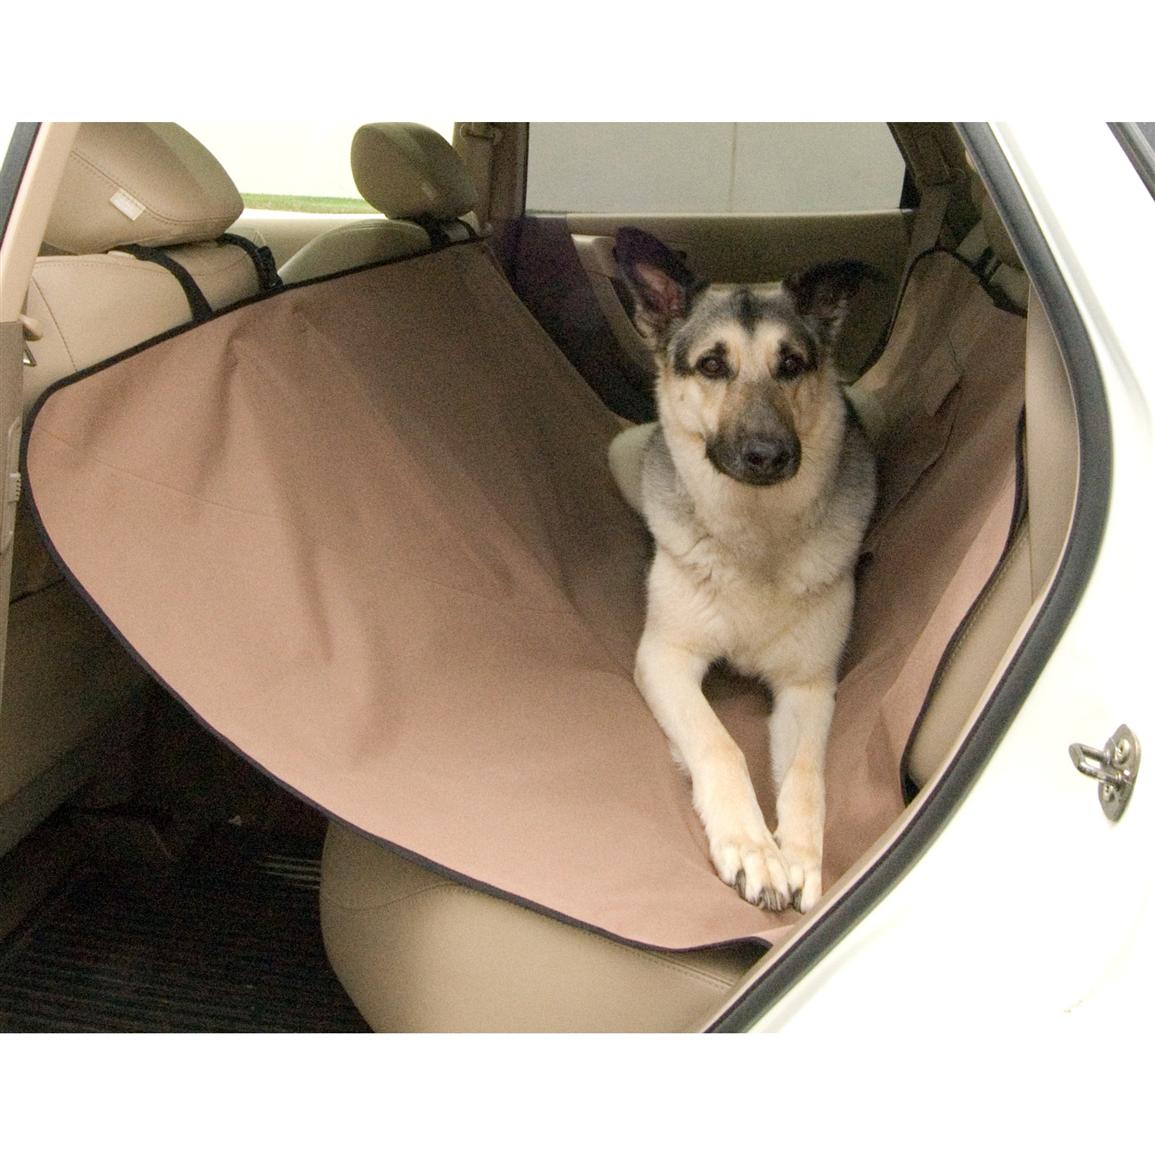 Car Seat Pet Cover - 201151, Pet Accessories at Sportsman's Guide